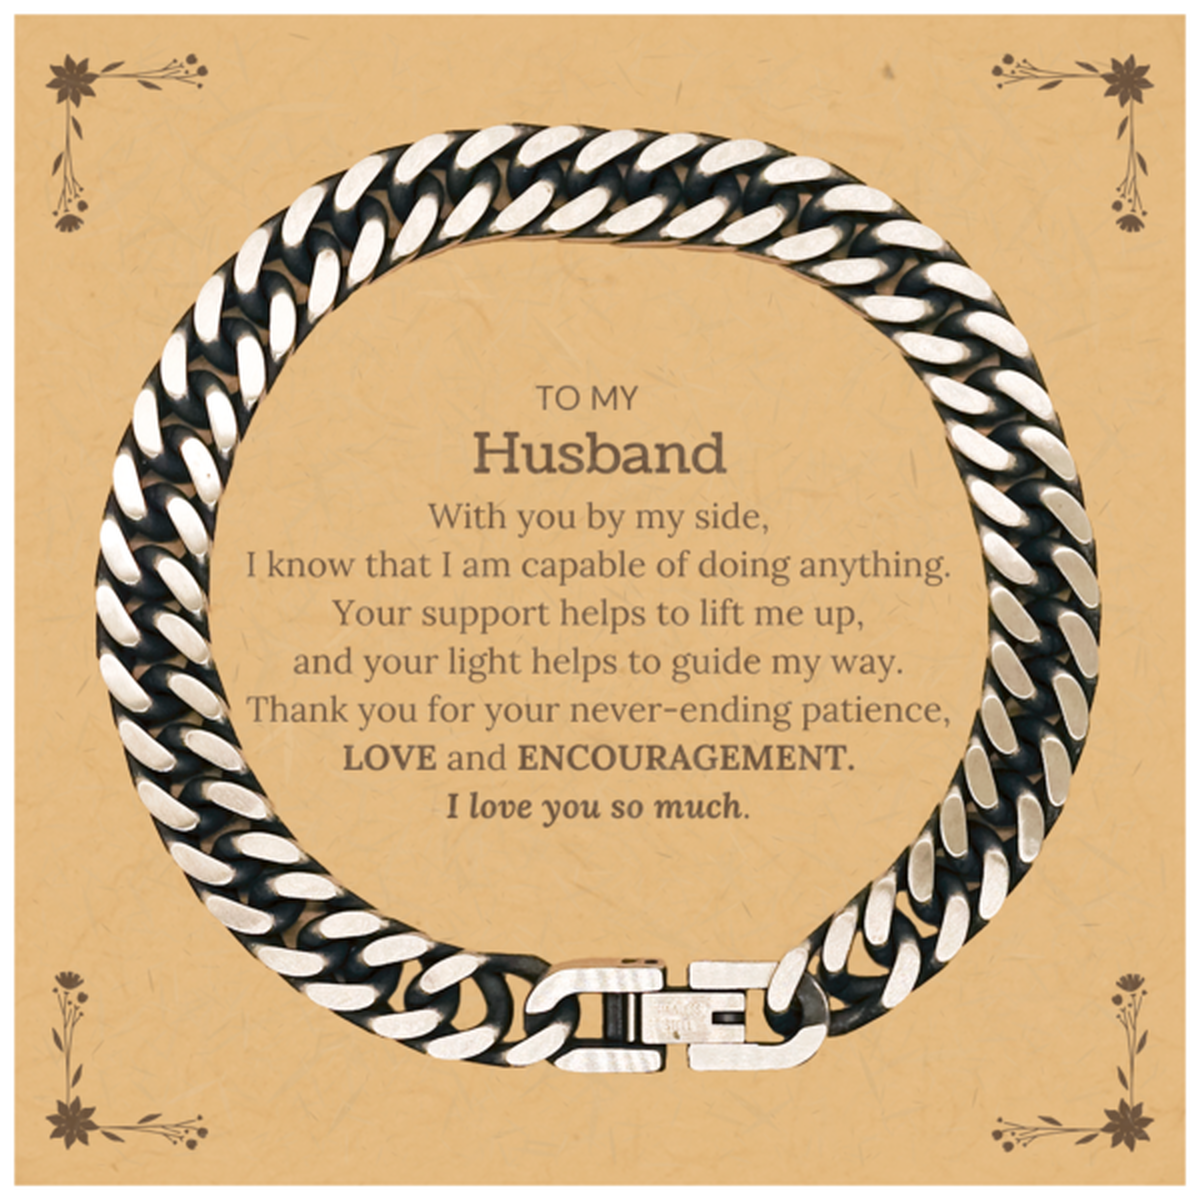 Appreciation Husband Cuban Link Chain Bracelet Gifts, To My Husband Birthday Christmas Wedding Keepsake Gifts for Husband With you by my side, I know that I am capable of doing anything. I love you so much